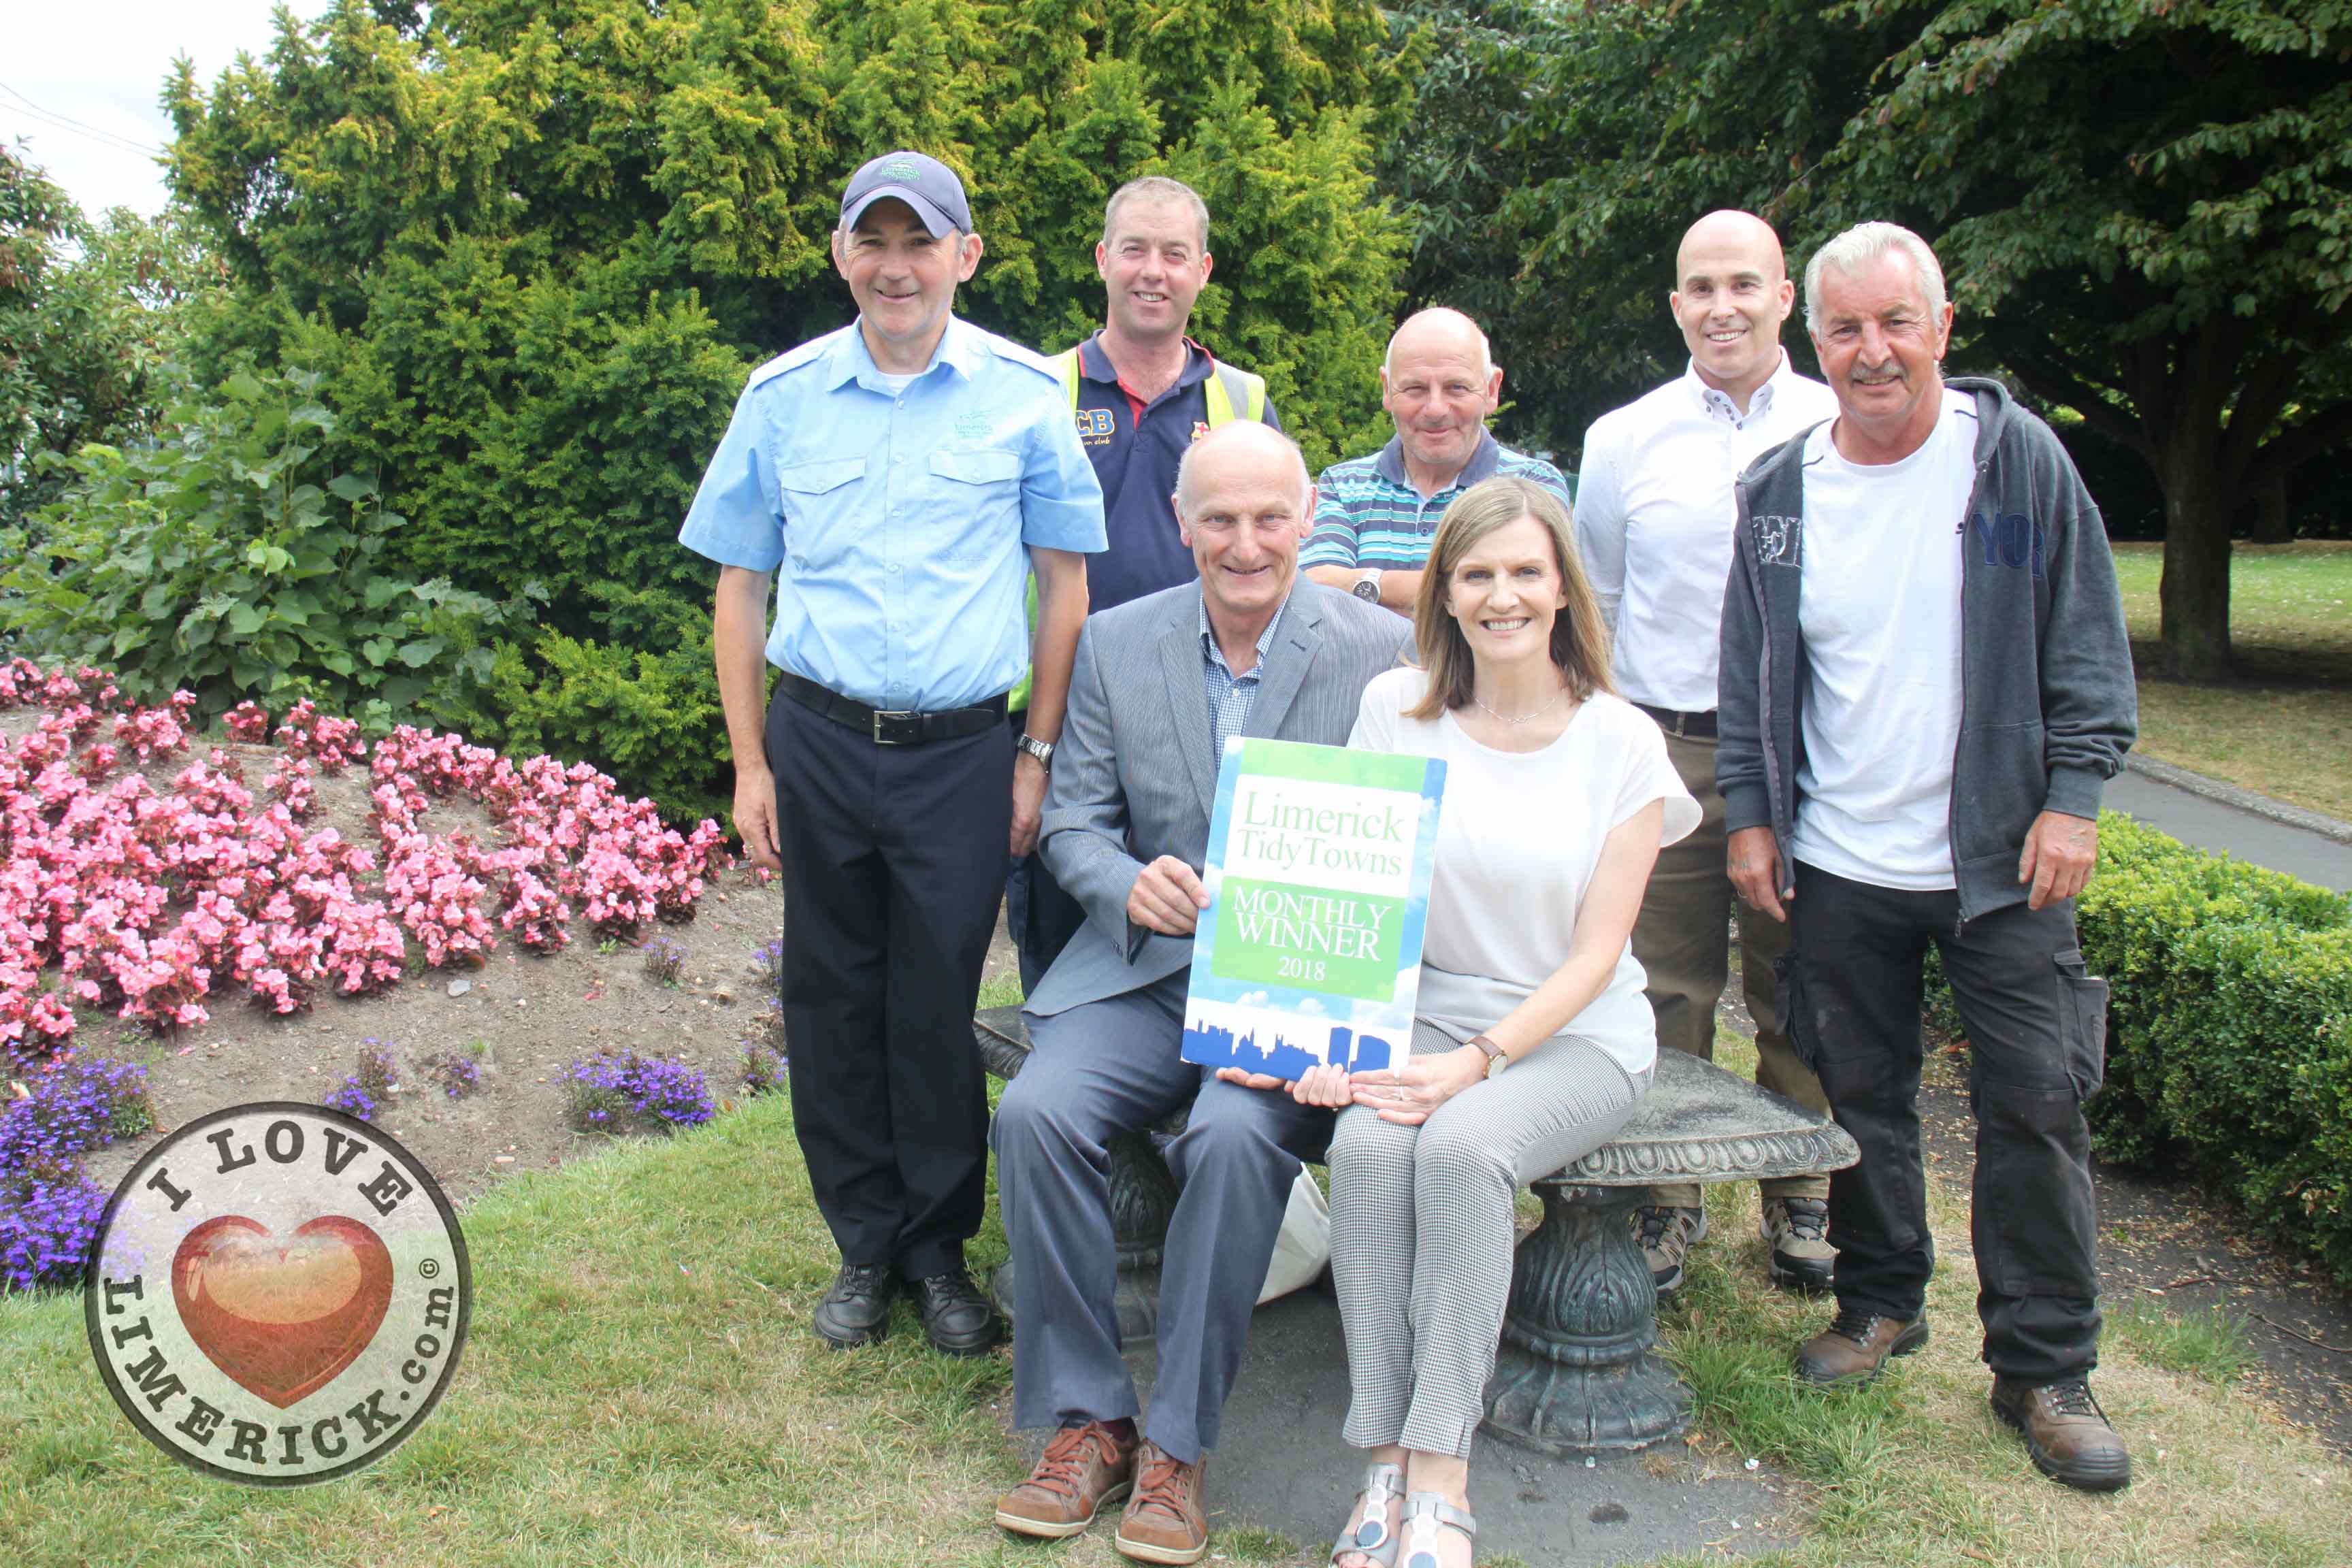 Tidy towns monthly award